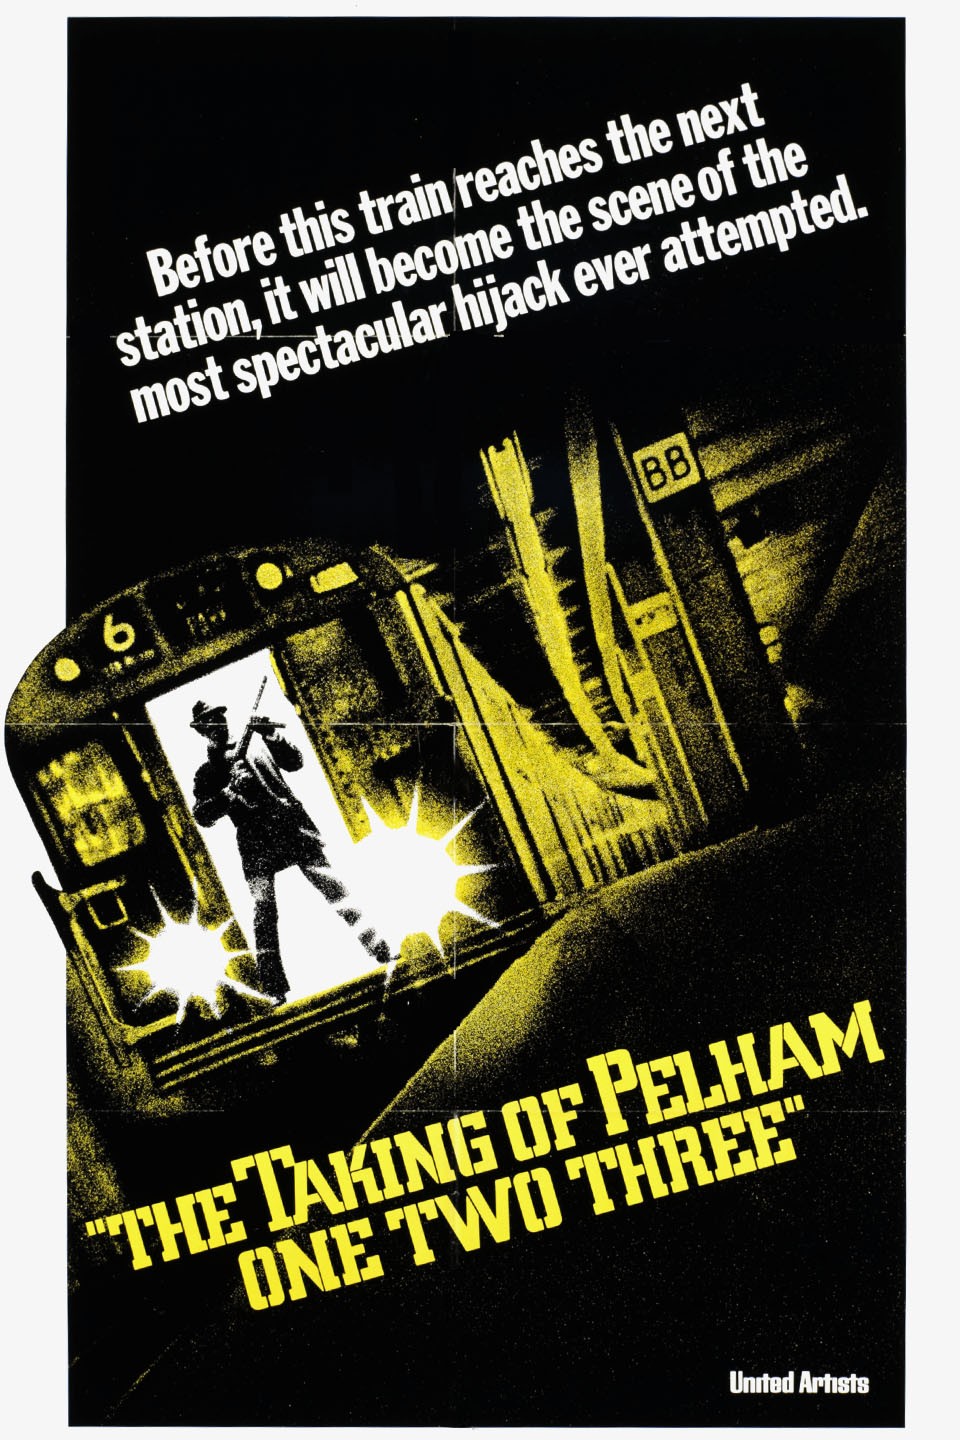 The Taking of Pelham One Two Three - Rotten Tomatoes